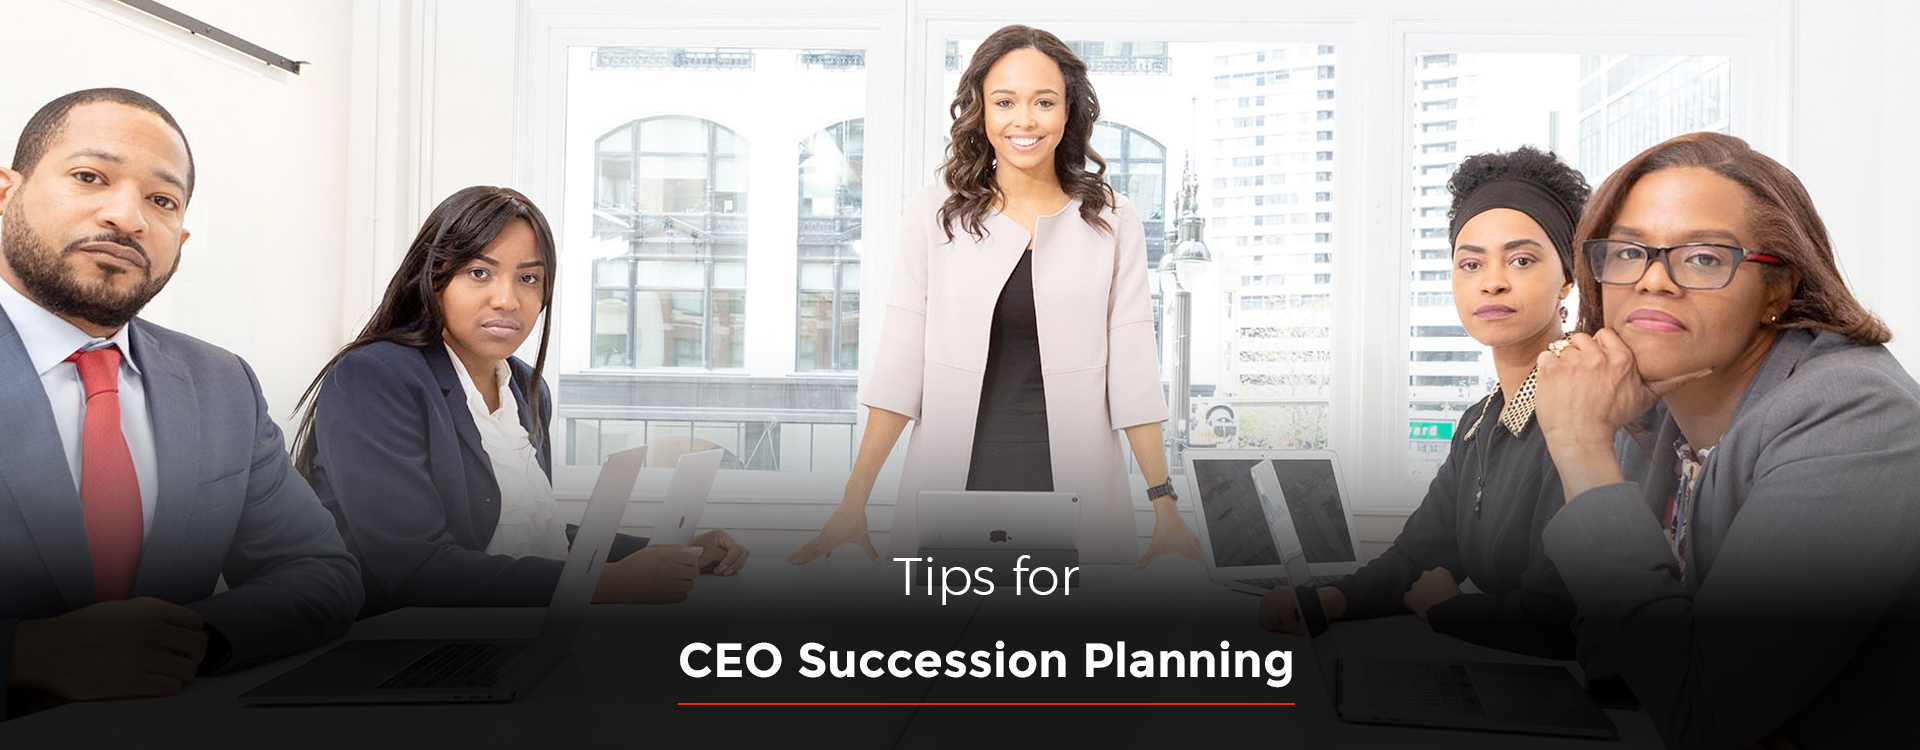 Tips for CEO Succession Planning